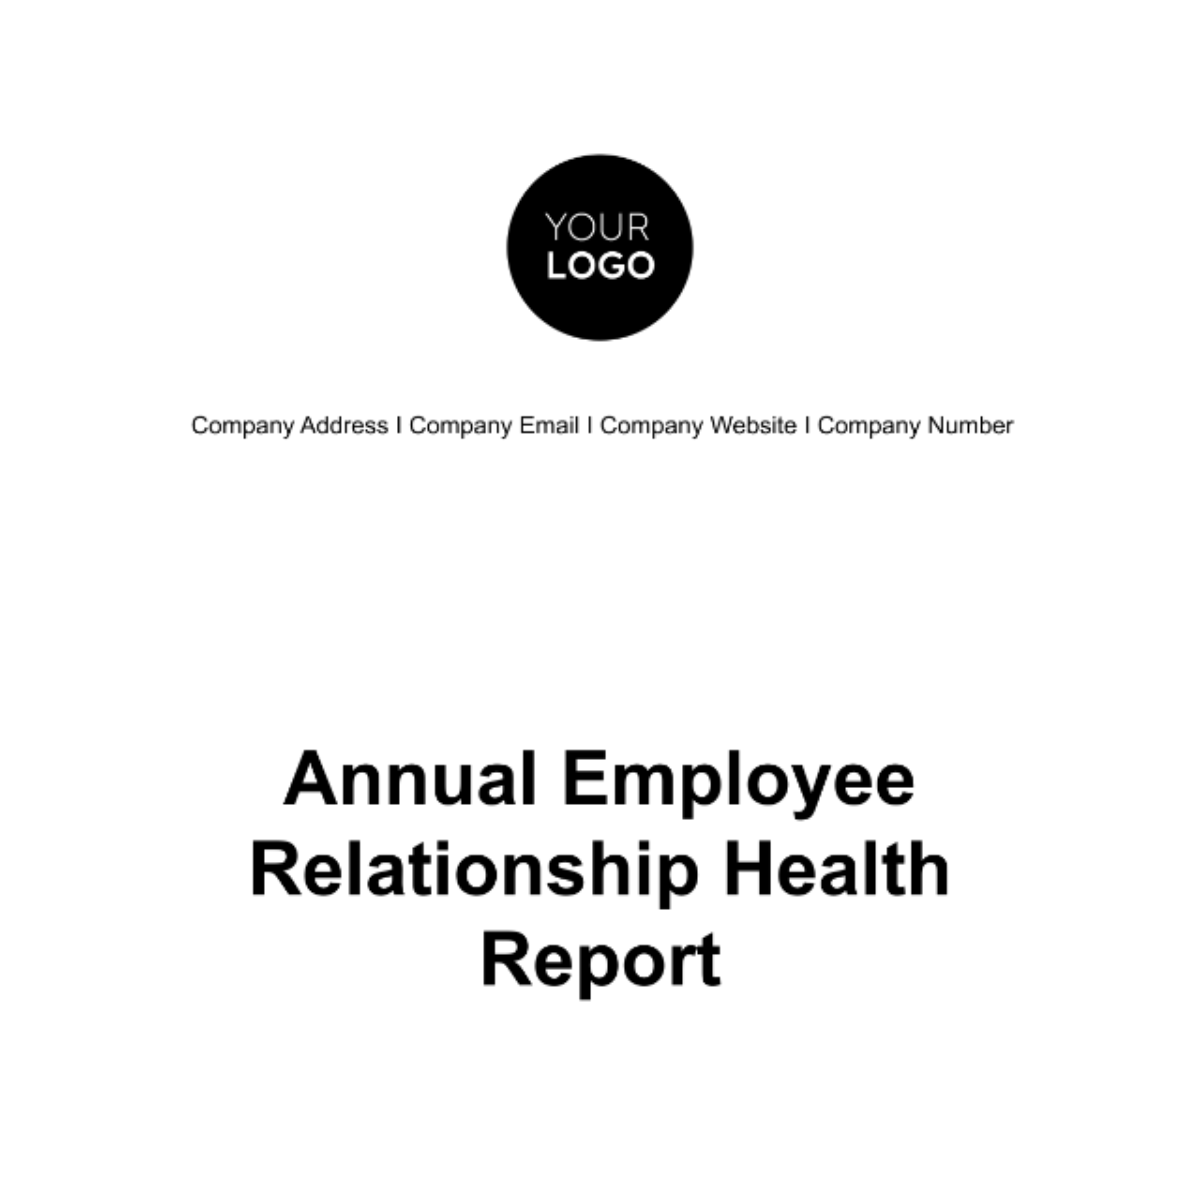 Free Annual Employee Relationship Health Report HR Template